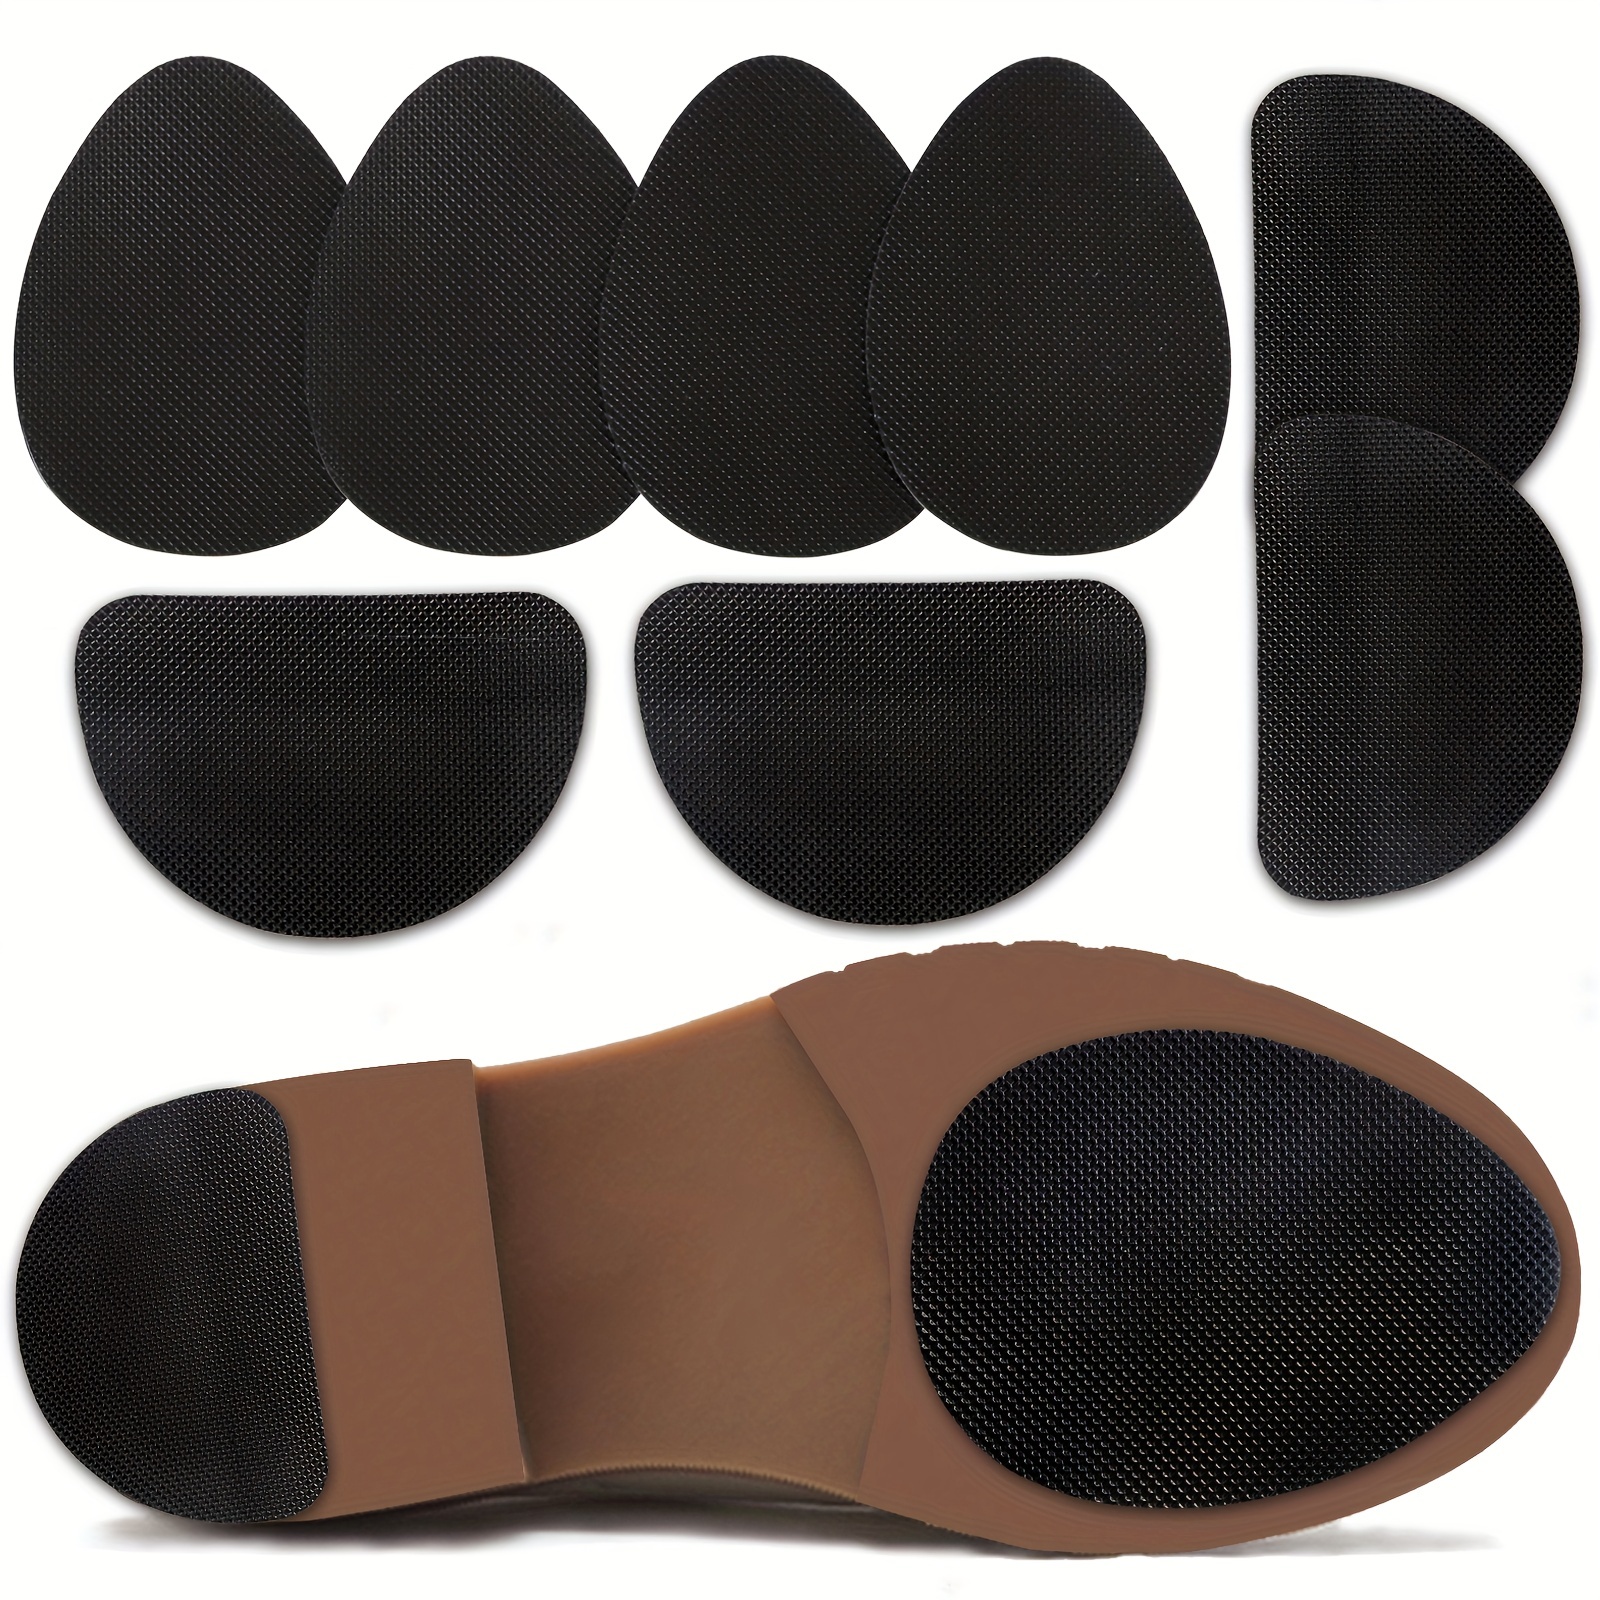  4Pairs Non Slip Shoe Pads Self-Adhesive Non Slip Pads for Shoes  for High Heel Shoes Noise Reduction Protection Sole : Health & Household